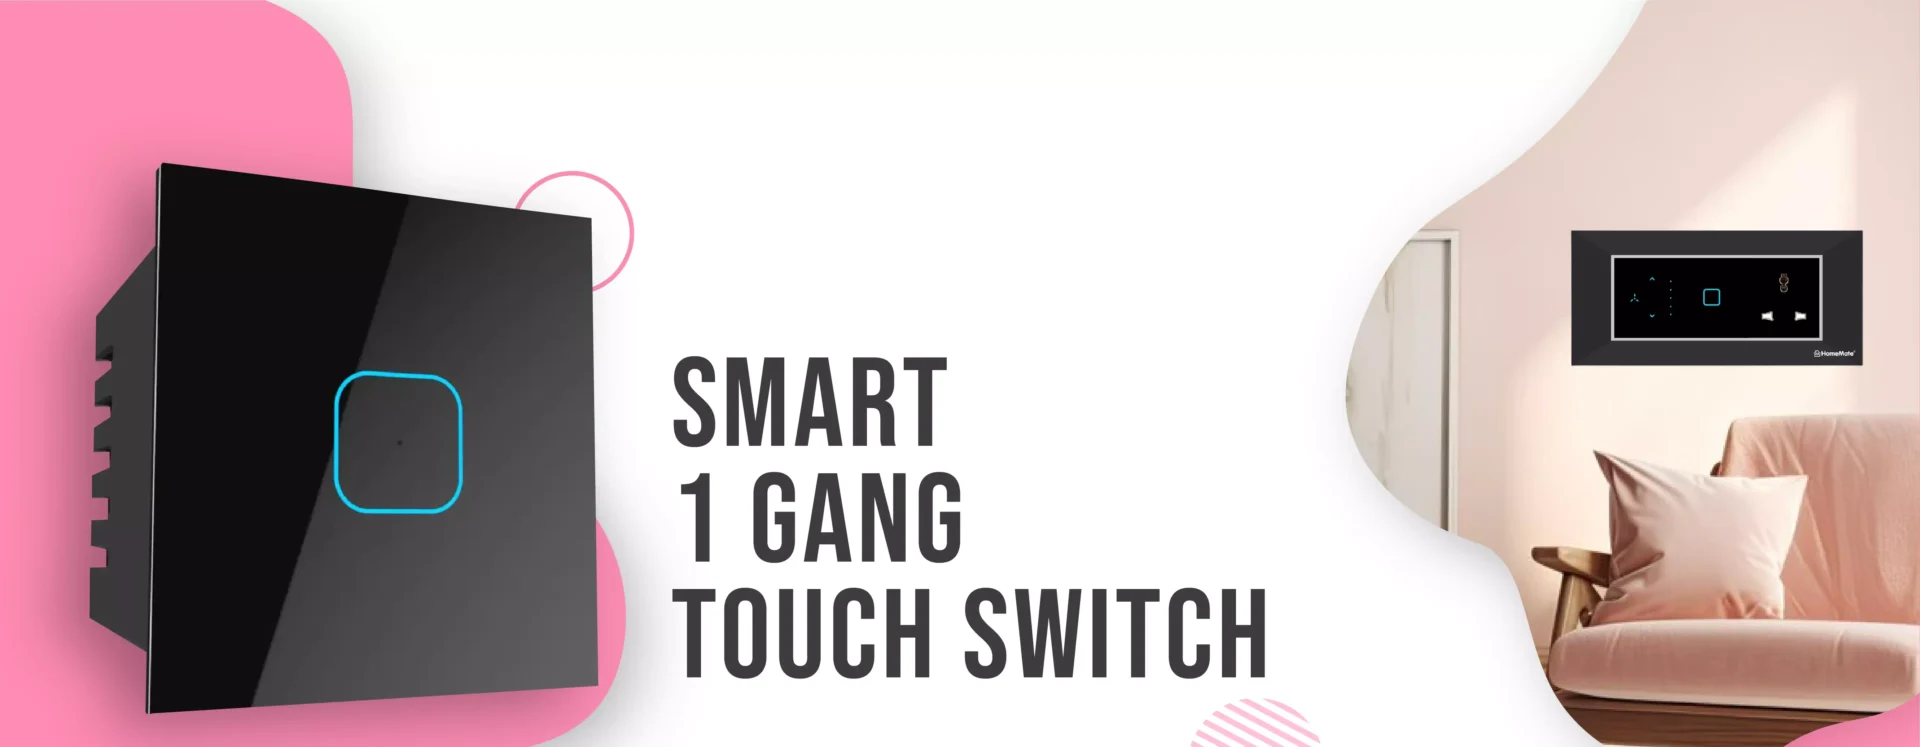 Smart 1 Gang Touch Switch